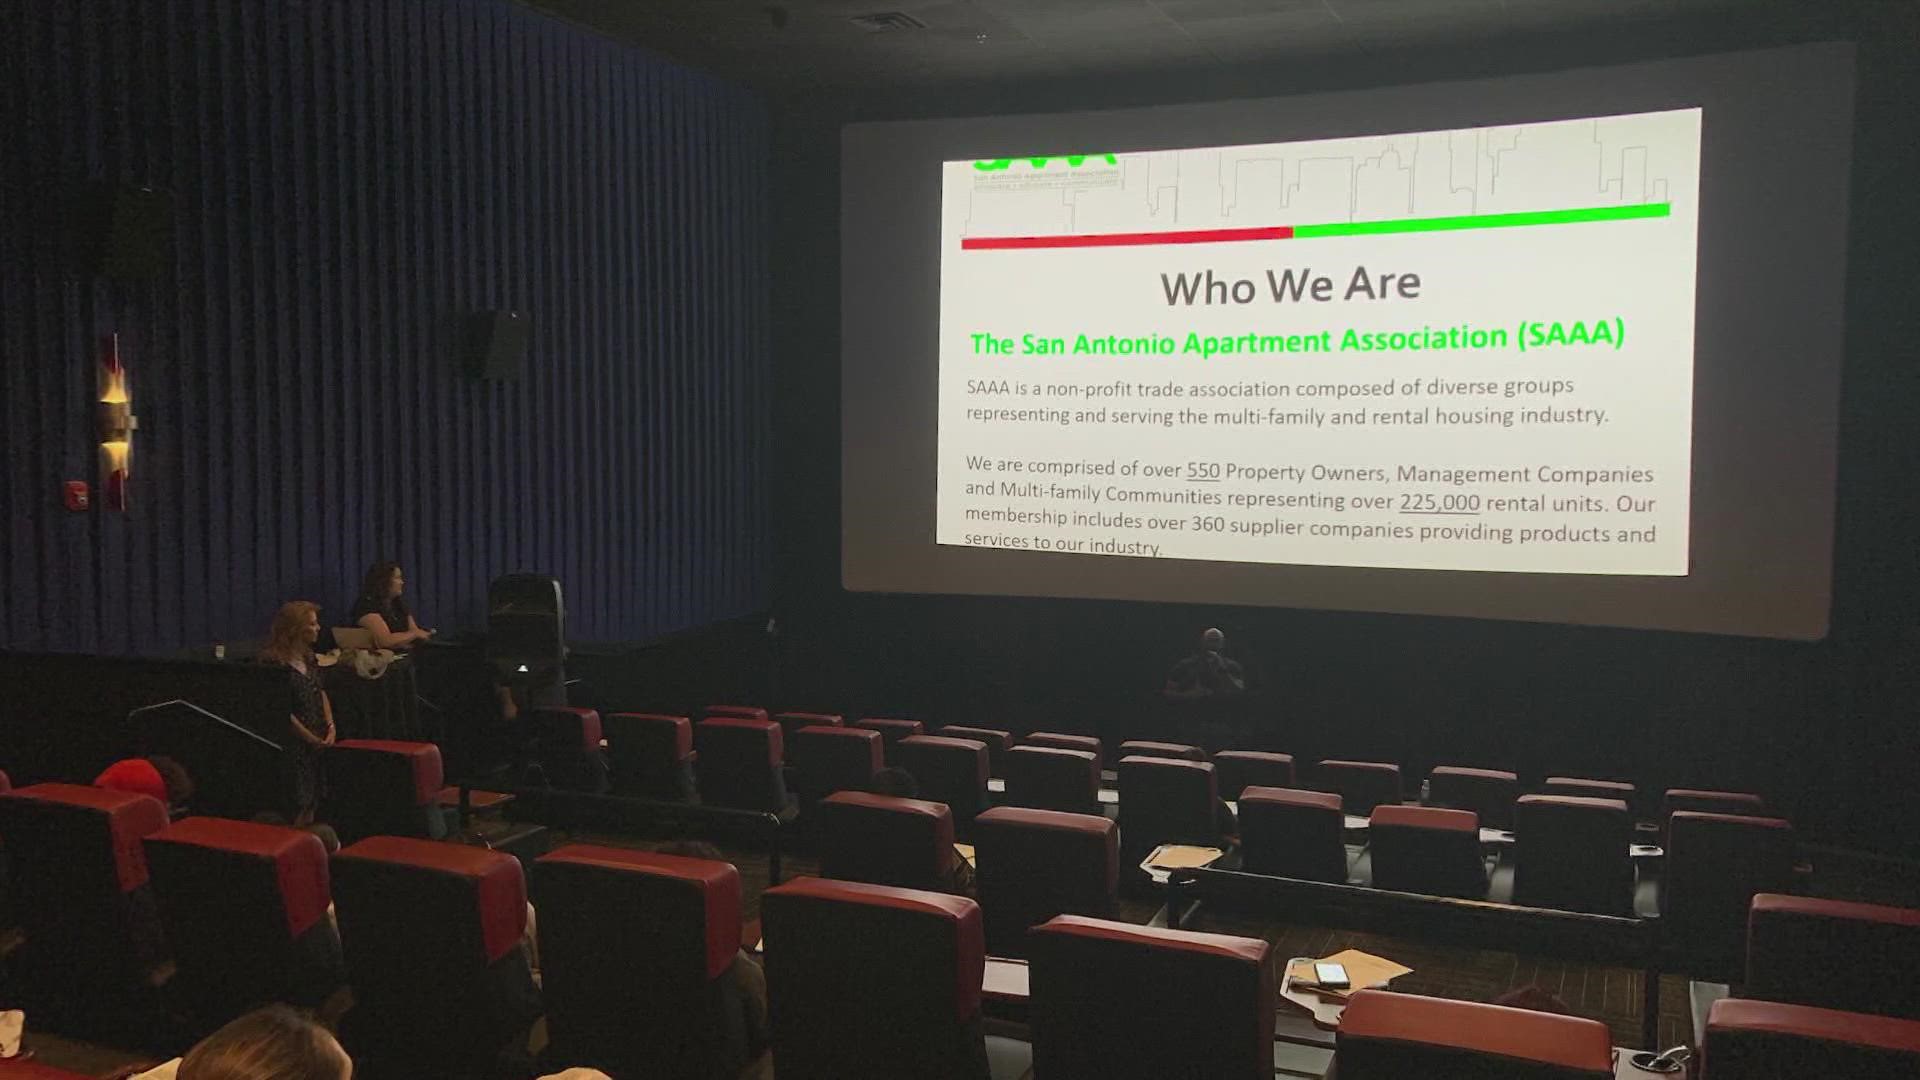 This week THRU Project teamed up with the San Antonio Apartment Association to hold a workshop to learn the ins and outs of searching for an apartment.